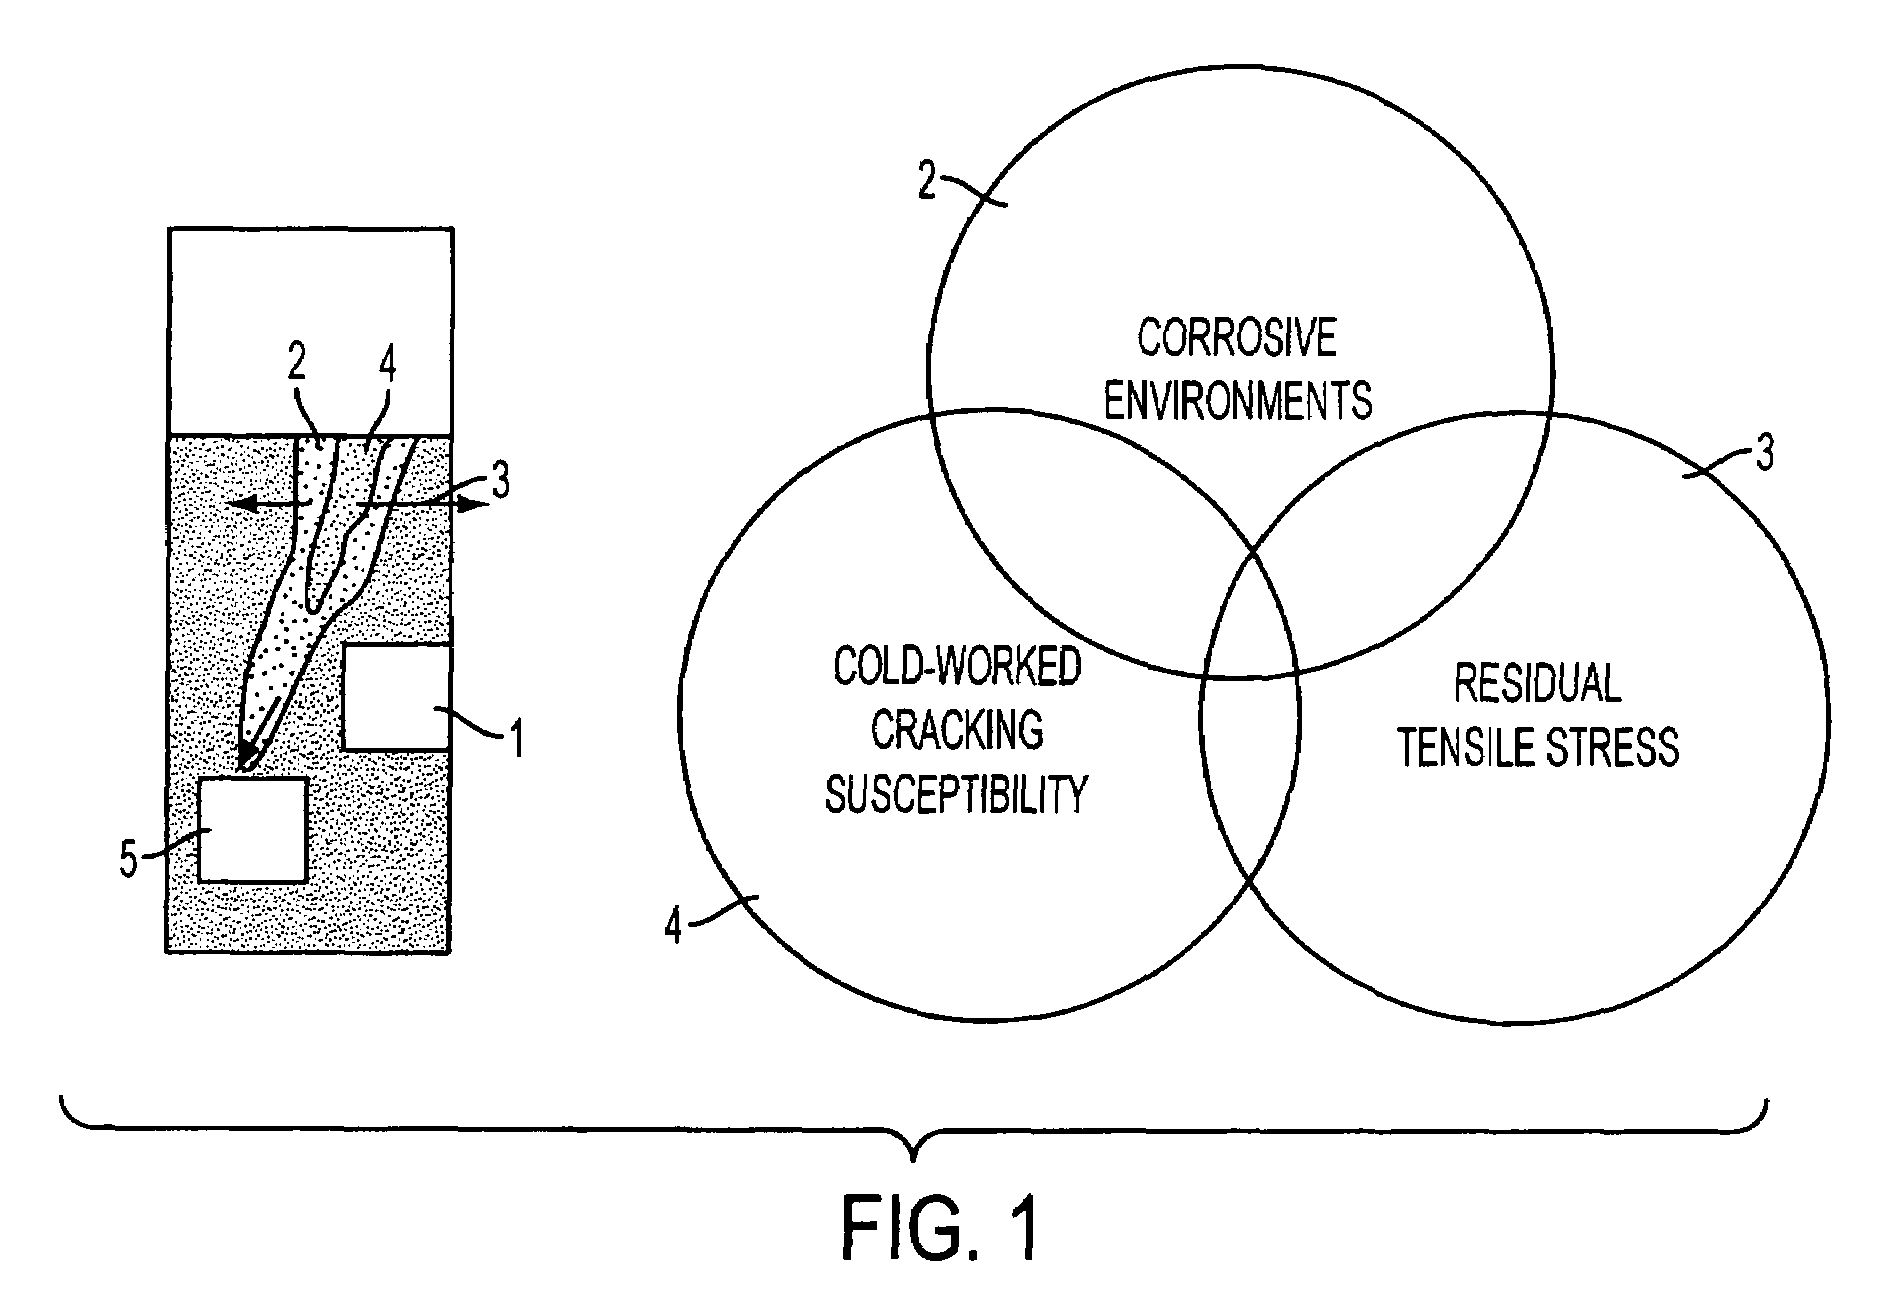 Method of an ultra-short femtosecond pulse and KW class high average-power laser for preventing cold-worked stress corrosion cracking in iron steels and alloyed steels including stainless steels